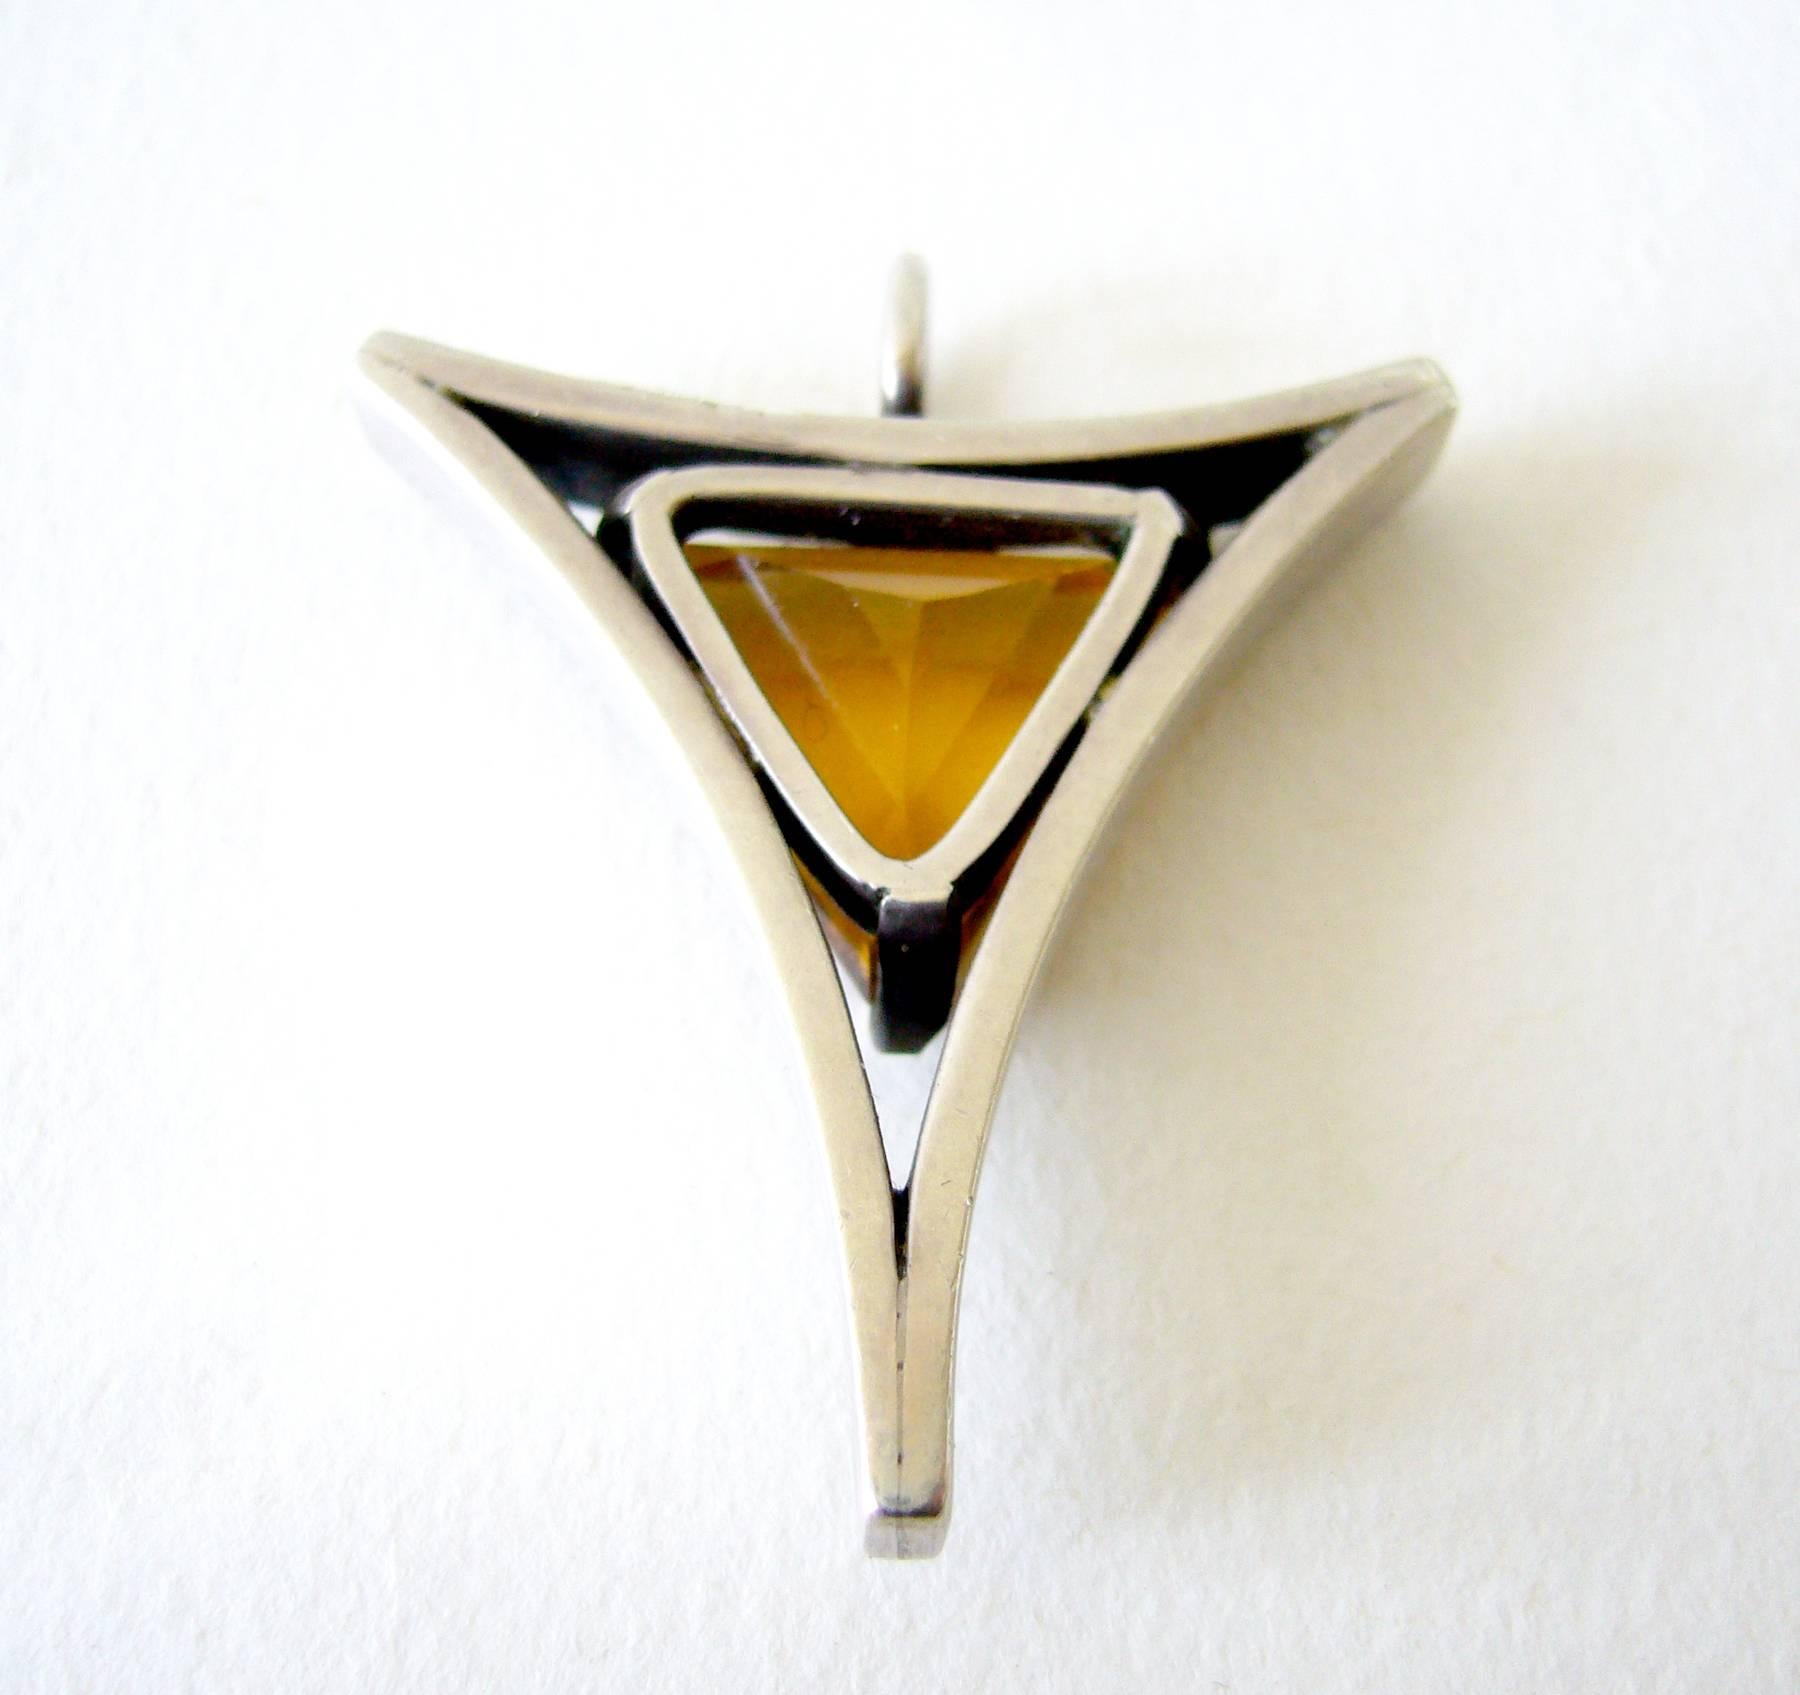 Faceted triangular shaped topaz or quartz stone set in sterling silver and open frame pendant created by Jack Nutting of San Francisco, California.  Pendant measures 1.5